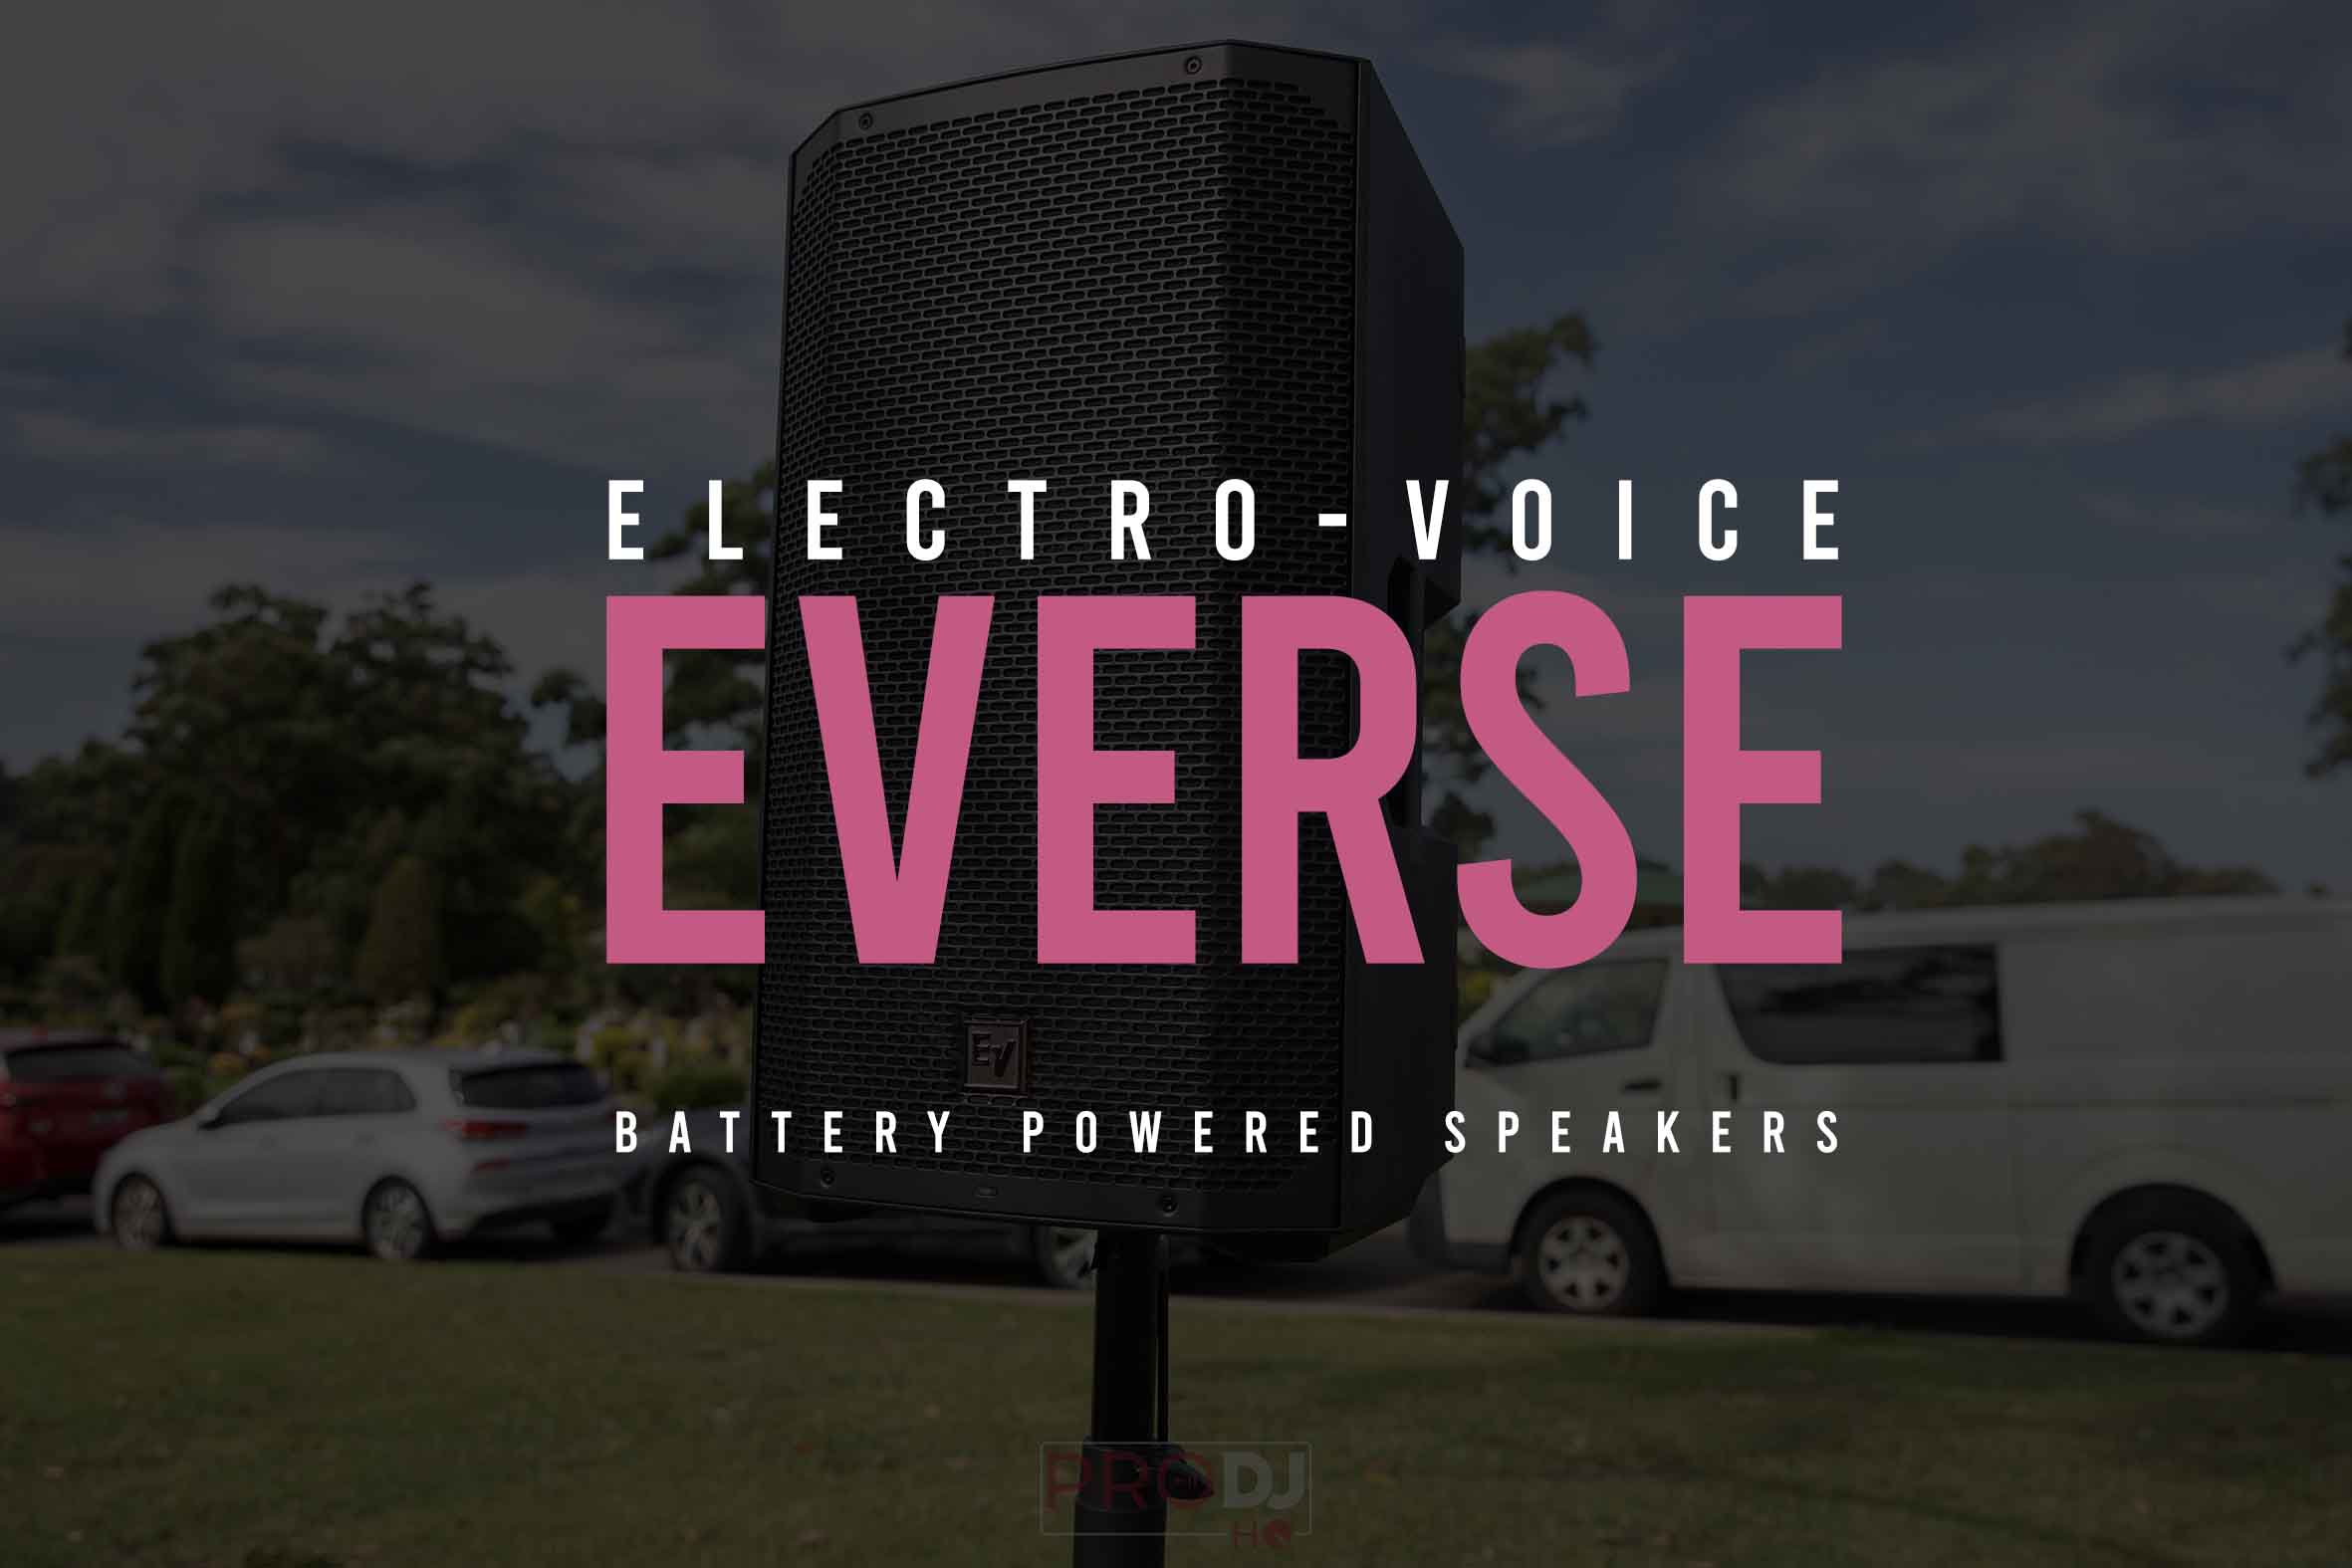 ELECTRO-VOICE EVERSE 8 & 12: PORTABILITY MEETS PERFORMANCE